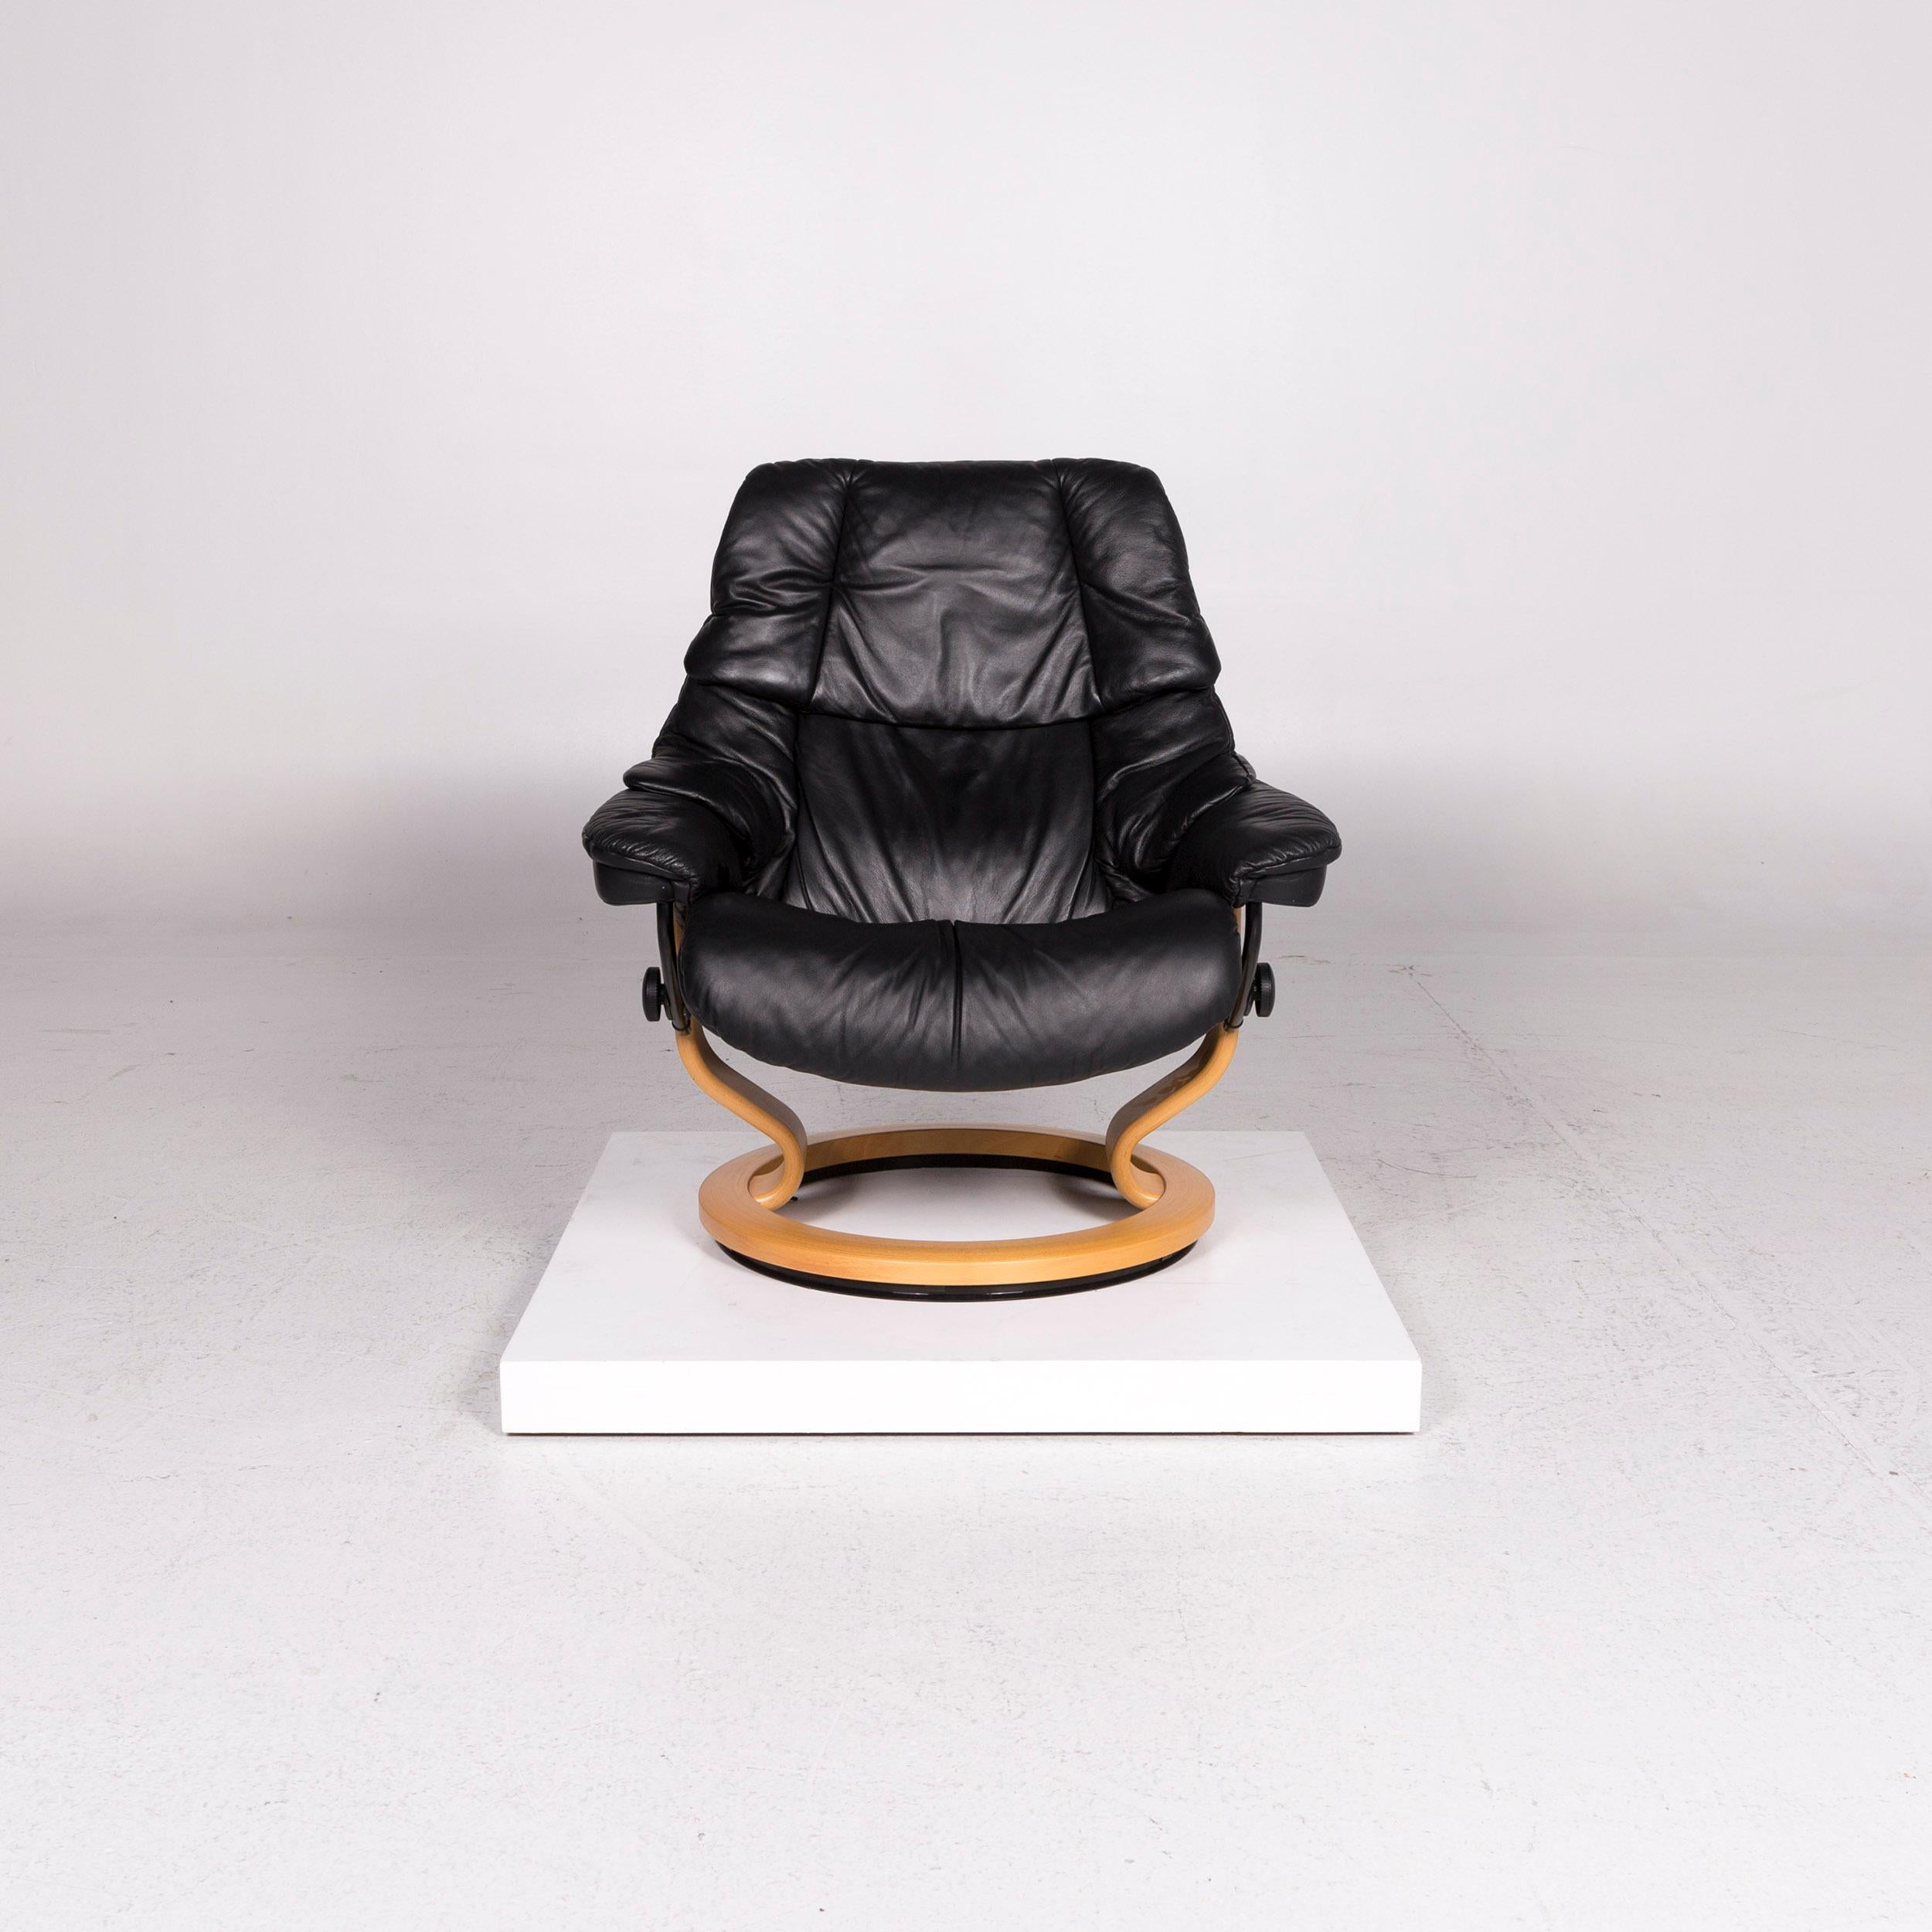 We bring to you a stressless leather armchair black function relax function size L.

 

 Product measurements in centimeters:
 

Depth 75
Width 78
Height 96
Seat-height 42
Rest-height 55
Seat-depth 48
Seat-width 64
Back-height 63.